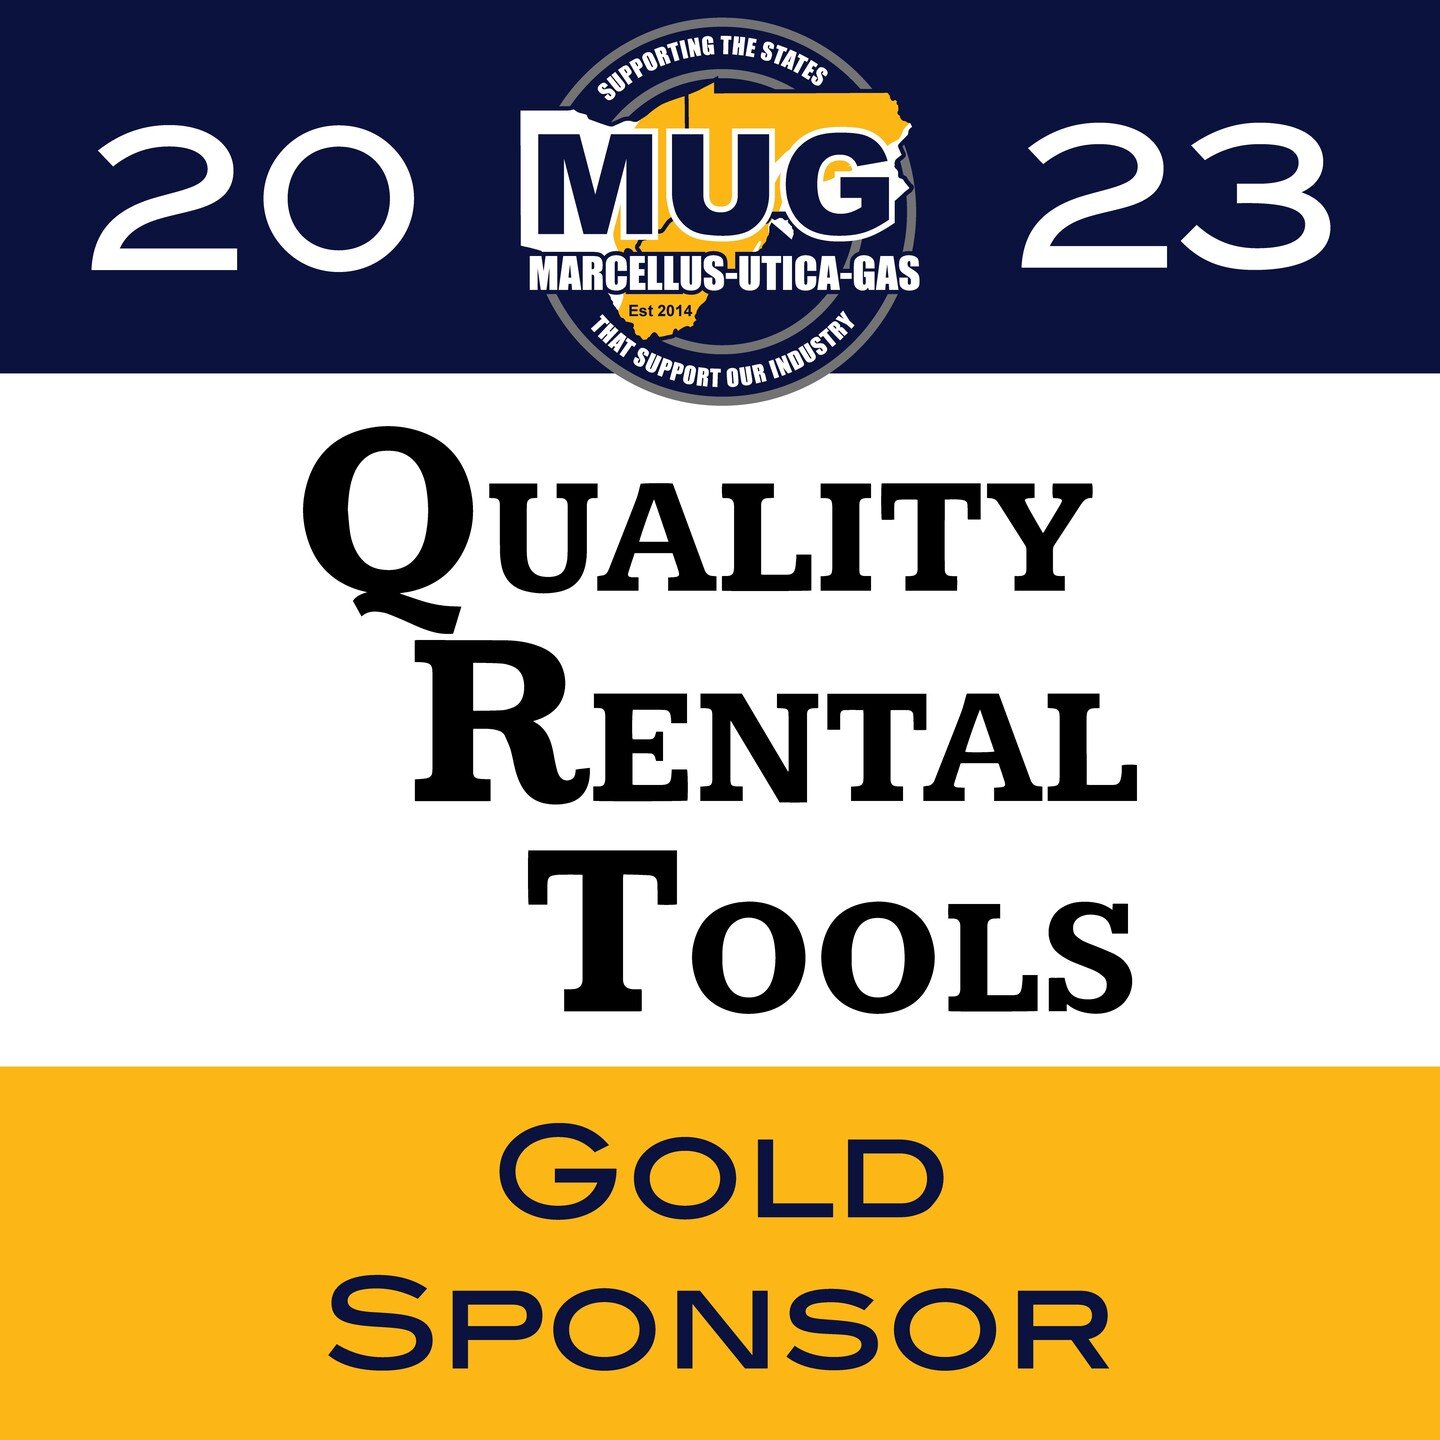 Thank you to our Gold Sponsor, Quality Rental Tools, for your support in 2023!